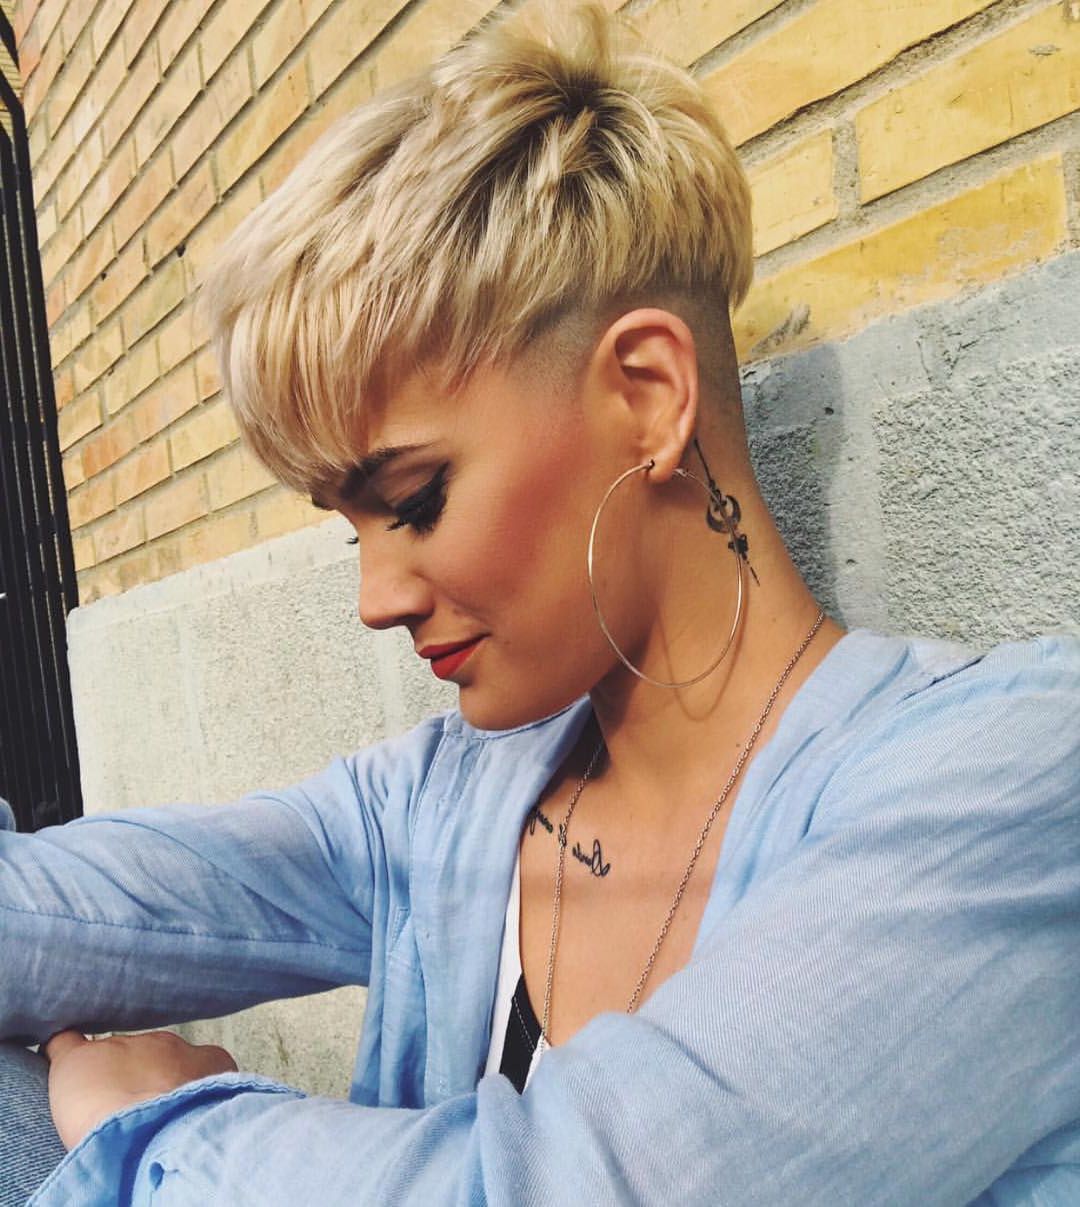 10 Stylish Pixie Haircuts – Women Short Undercut Hairstyles 2019 With Ruffled Pixie Hairstyles (View 18 of 20)